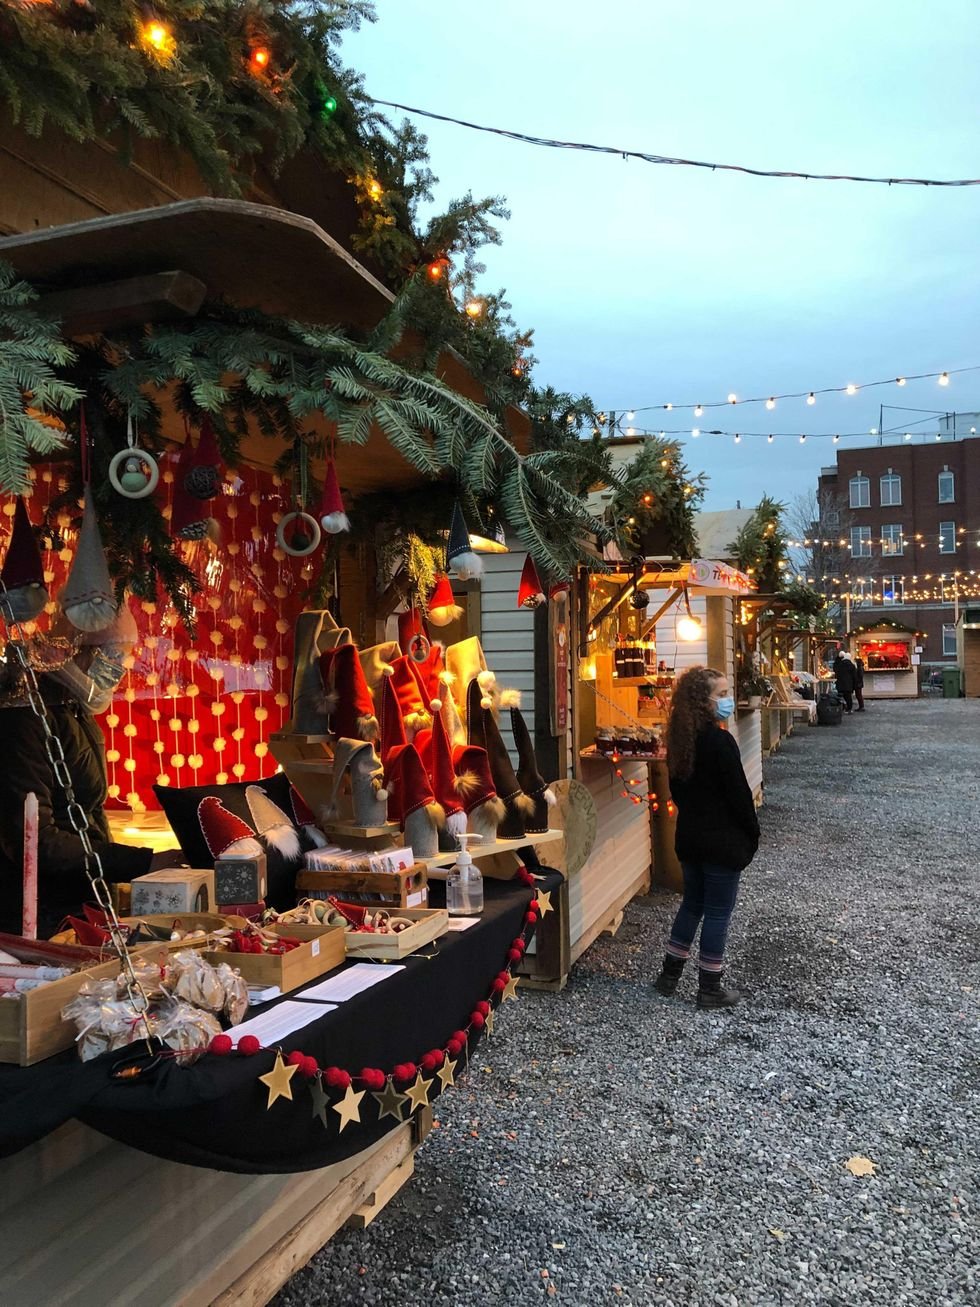 Montreal's Atwater Christmas Village Is Officially Open & It's Pure Holiday Magic (PHOTOS)